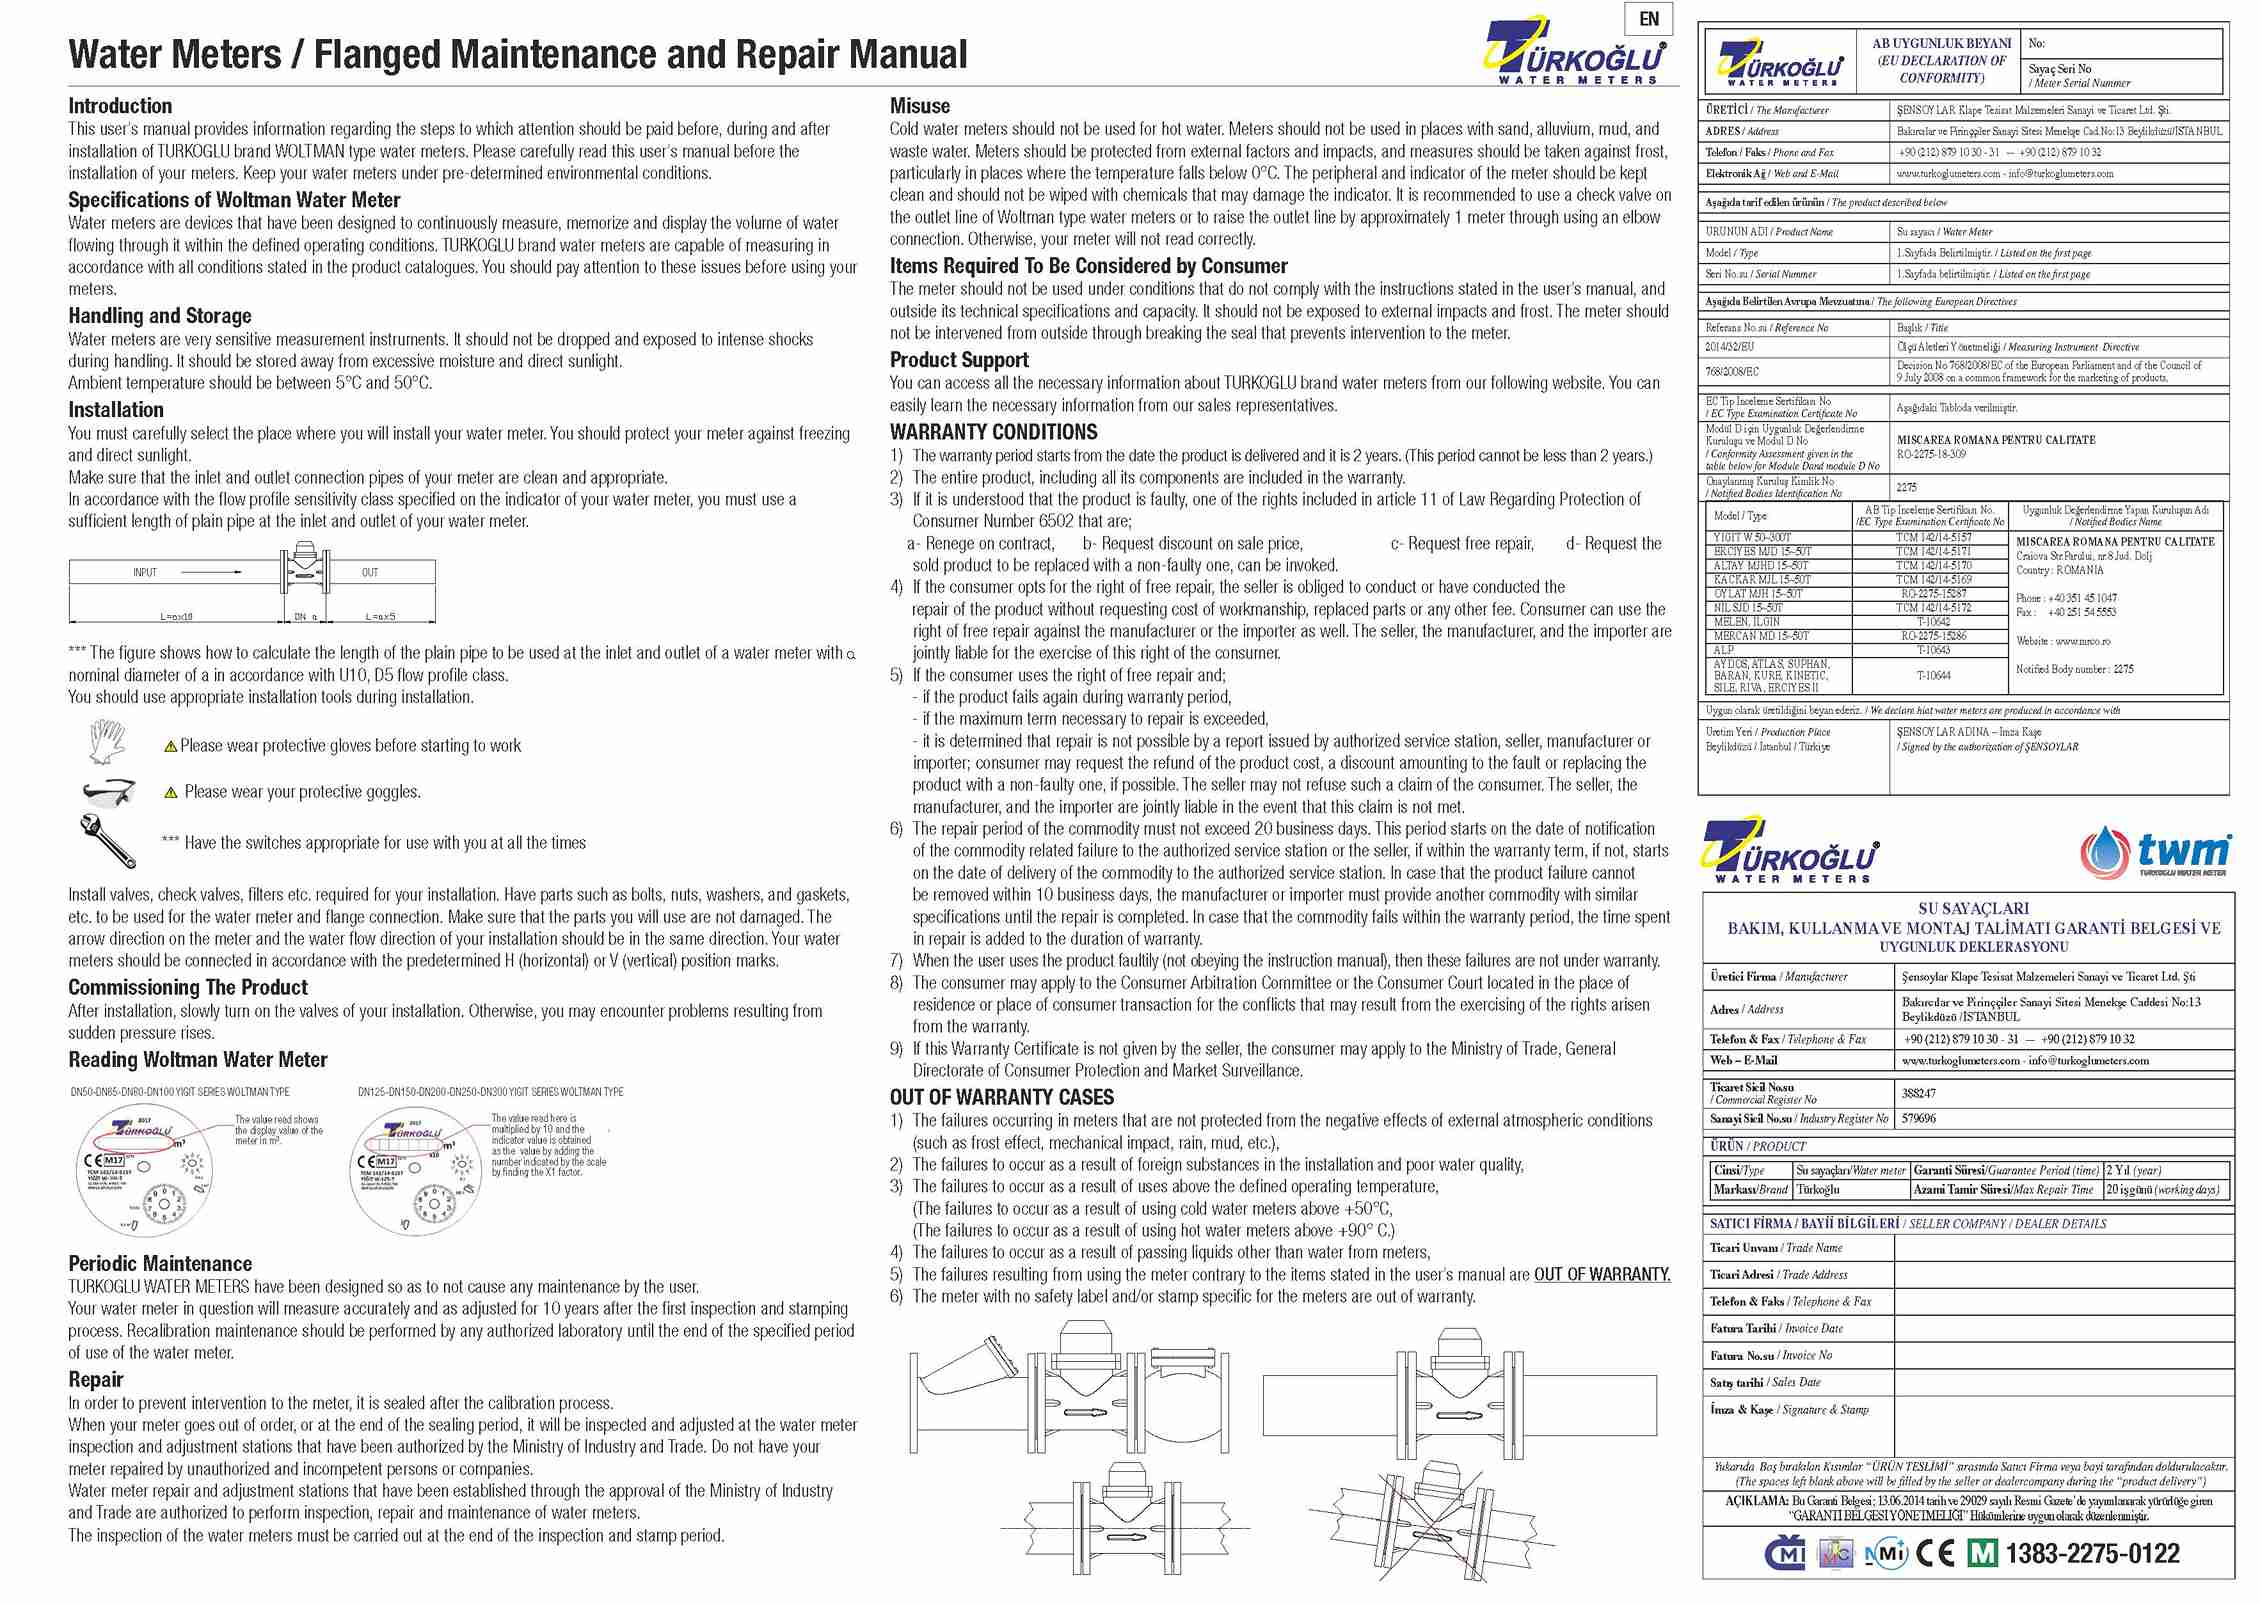 Instruction Manual And Warranty Certificate For Flanged Type